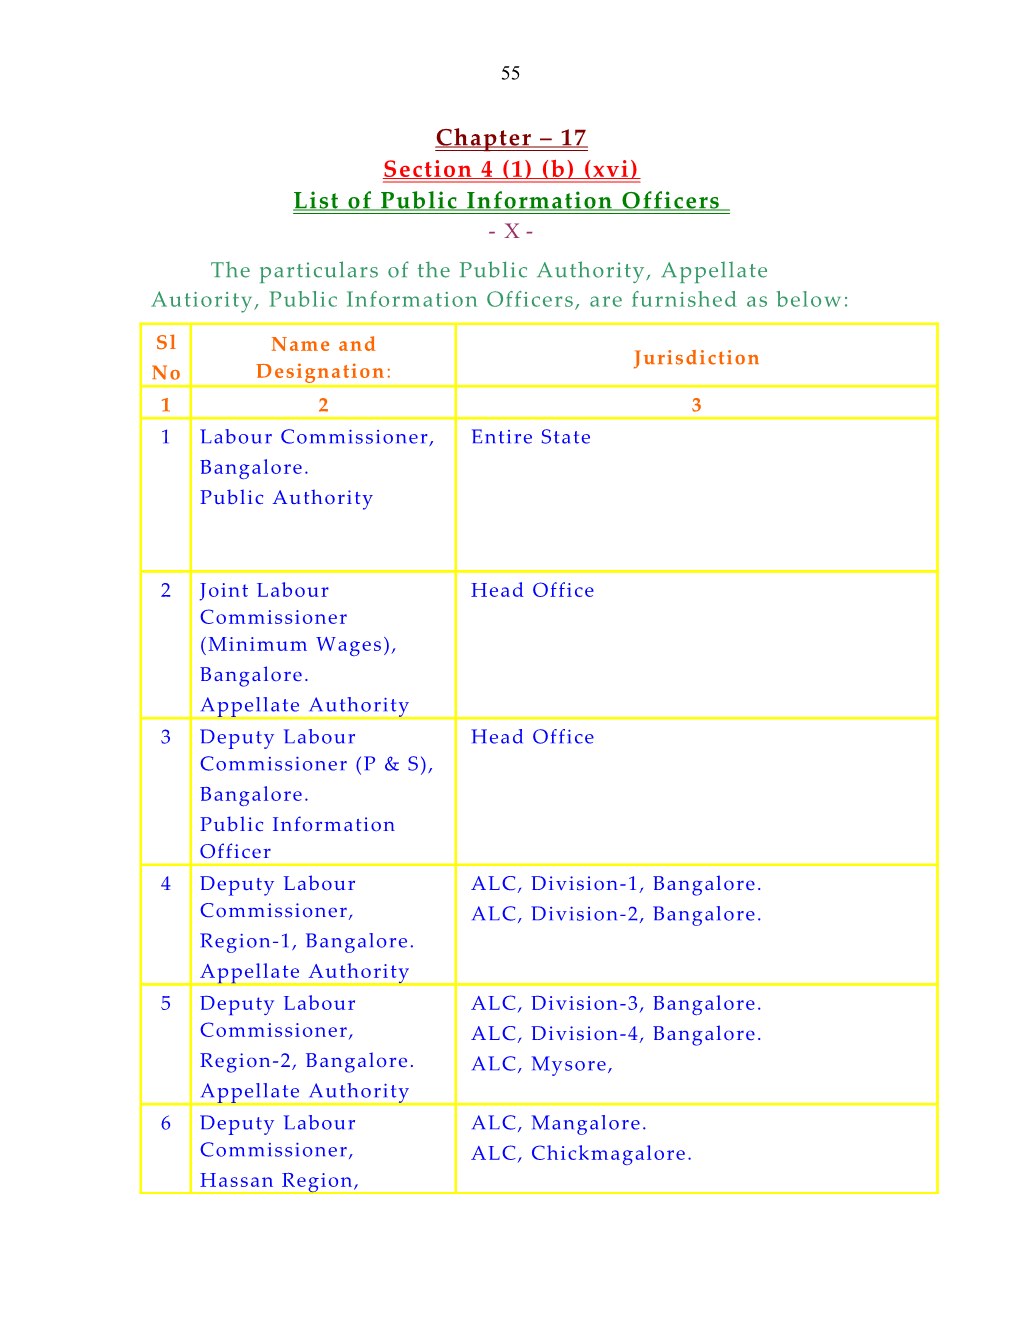 List of Public Information Officers